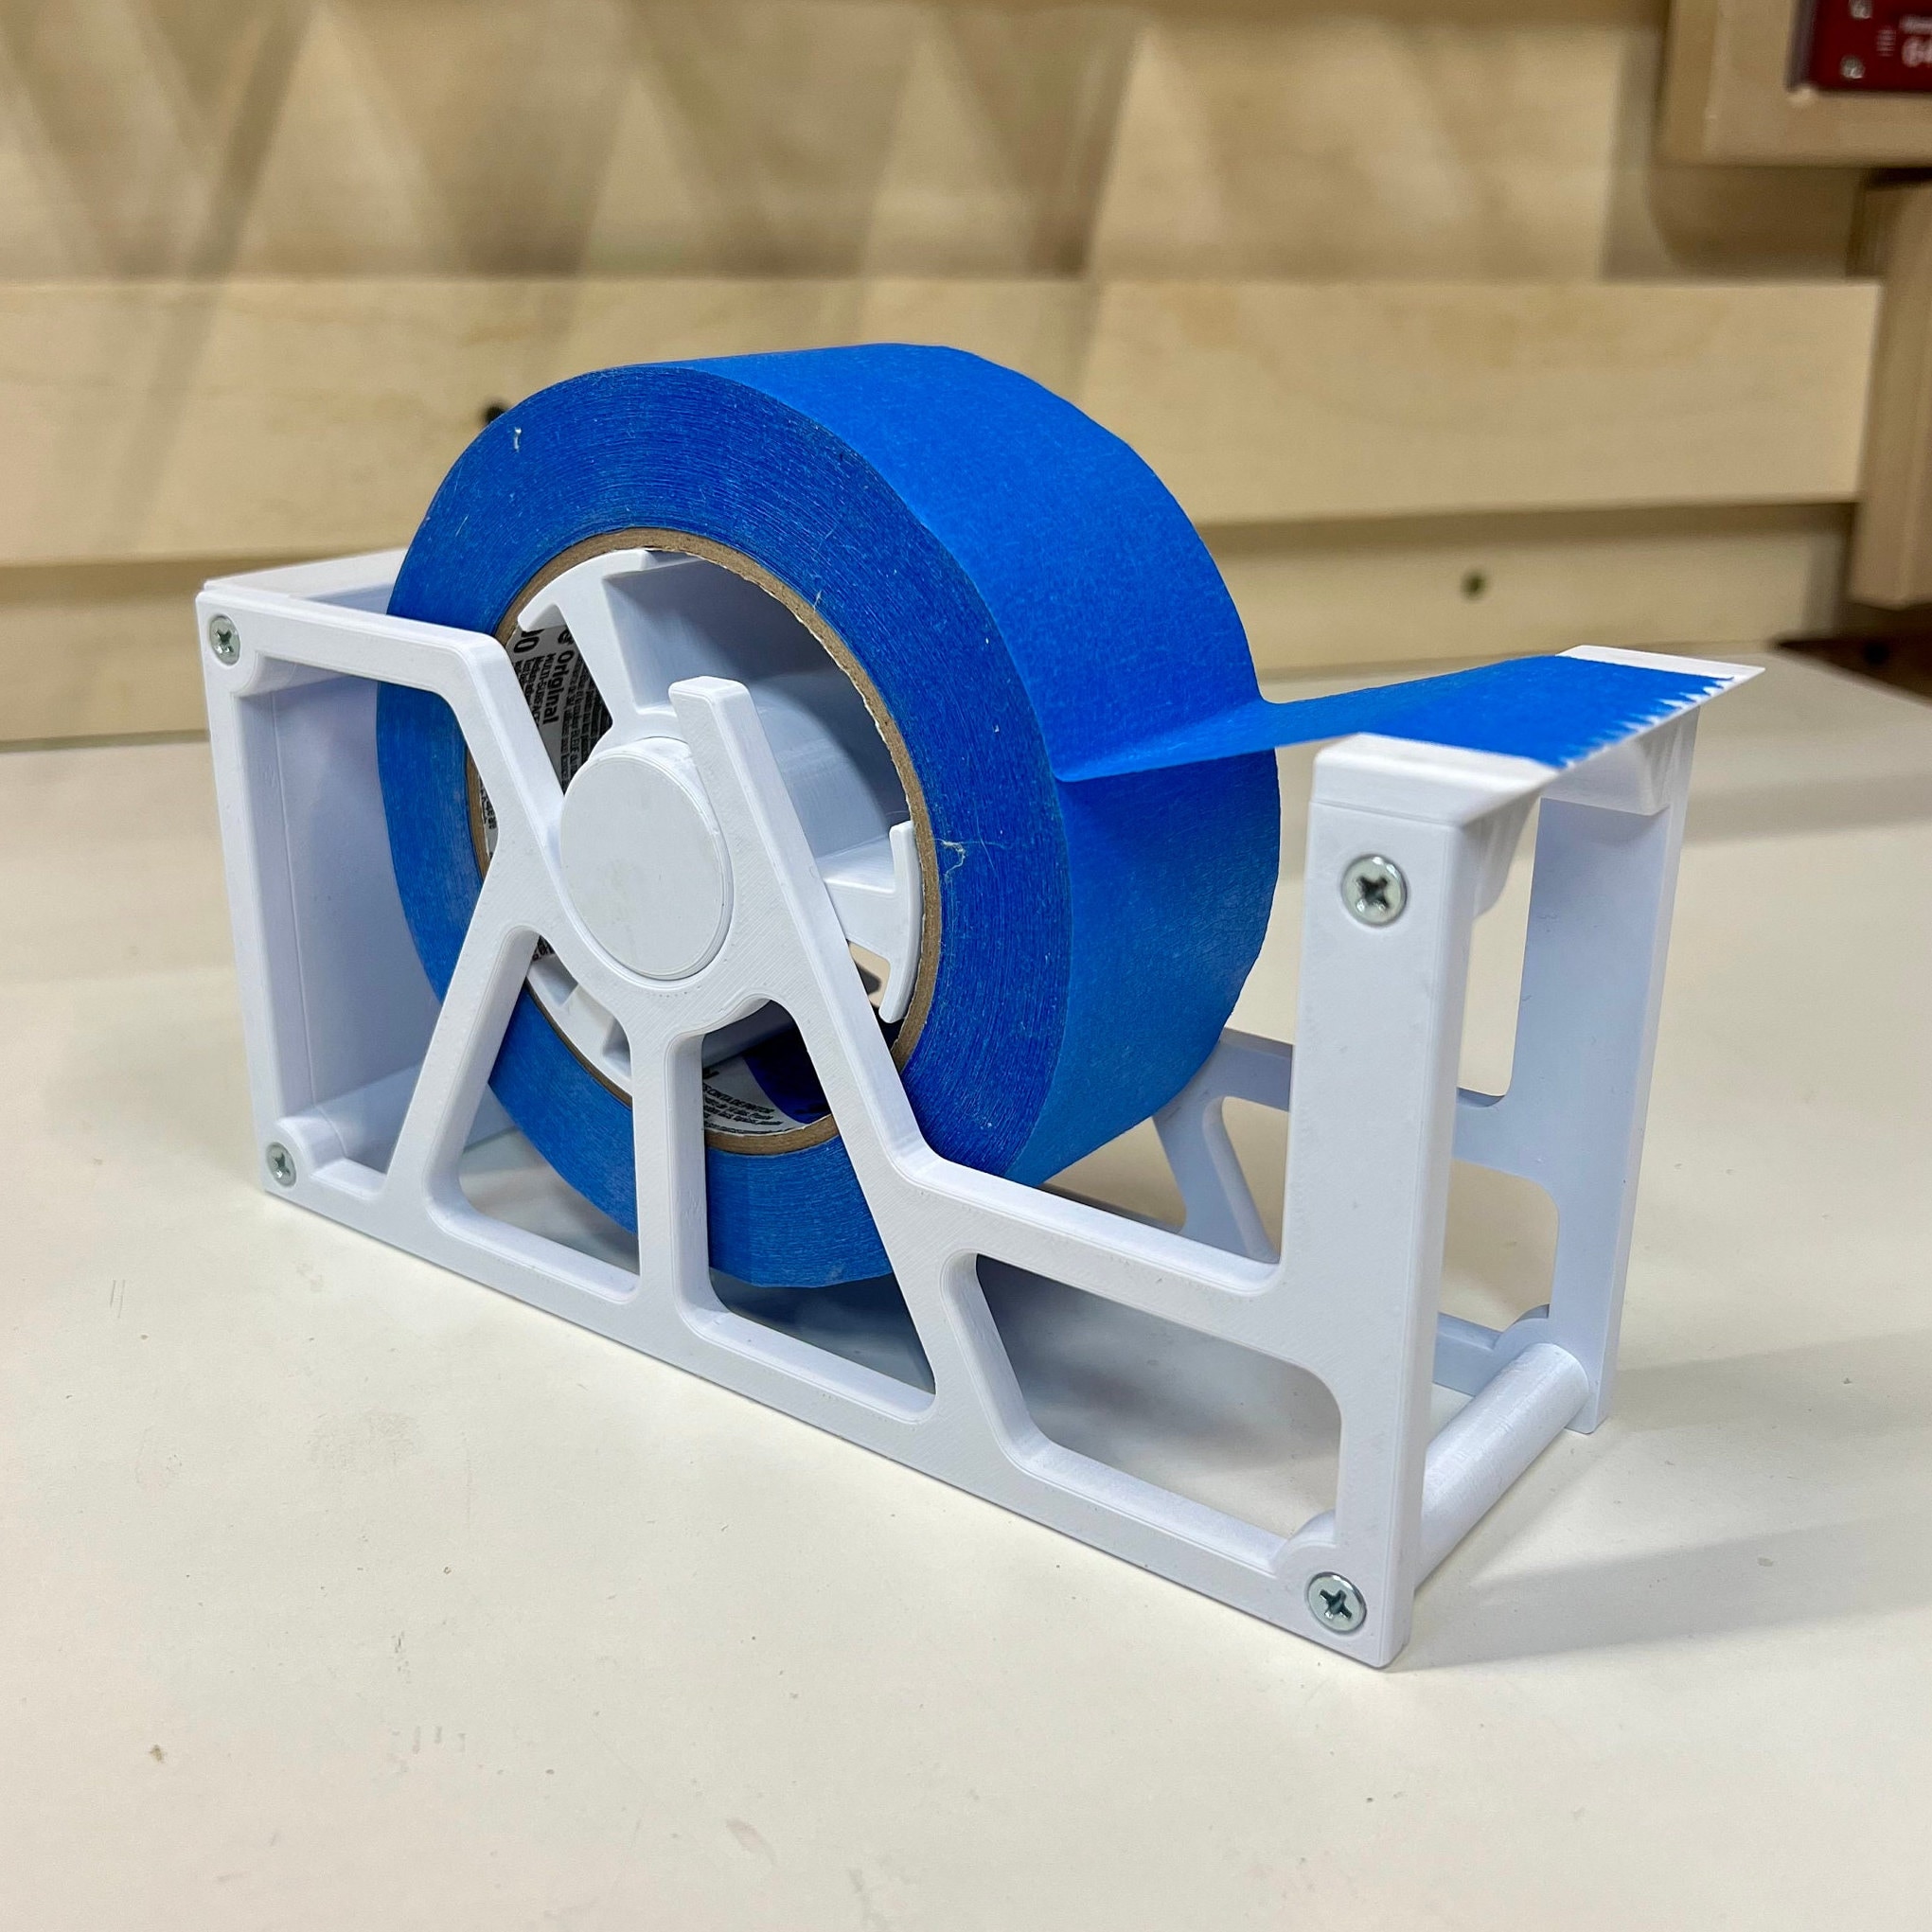 Needed a painters Tape dispenser : r/lasercutting